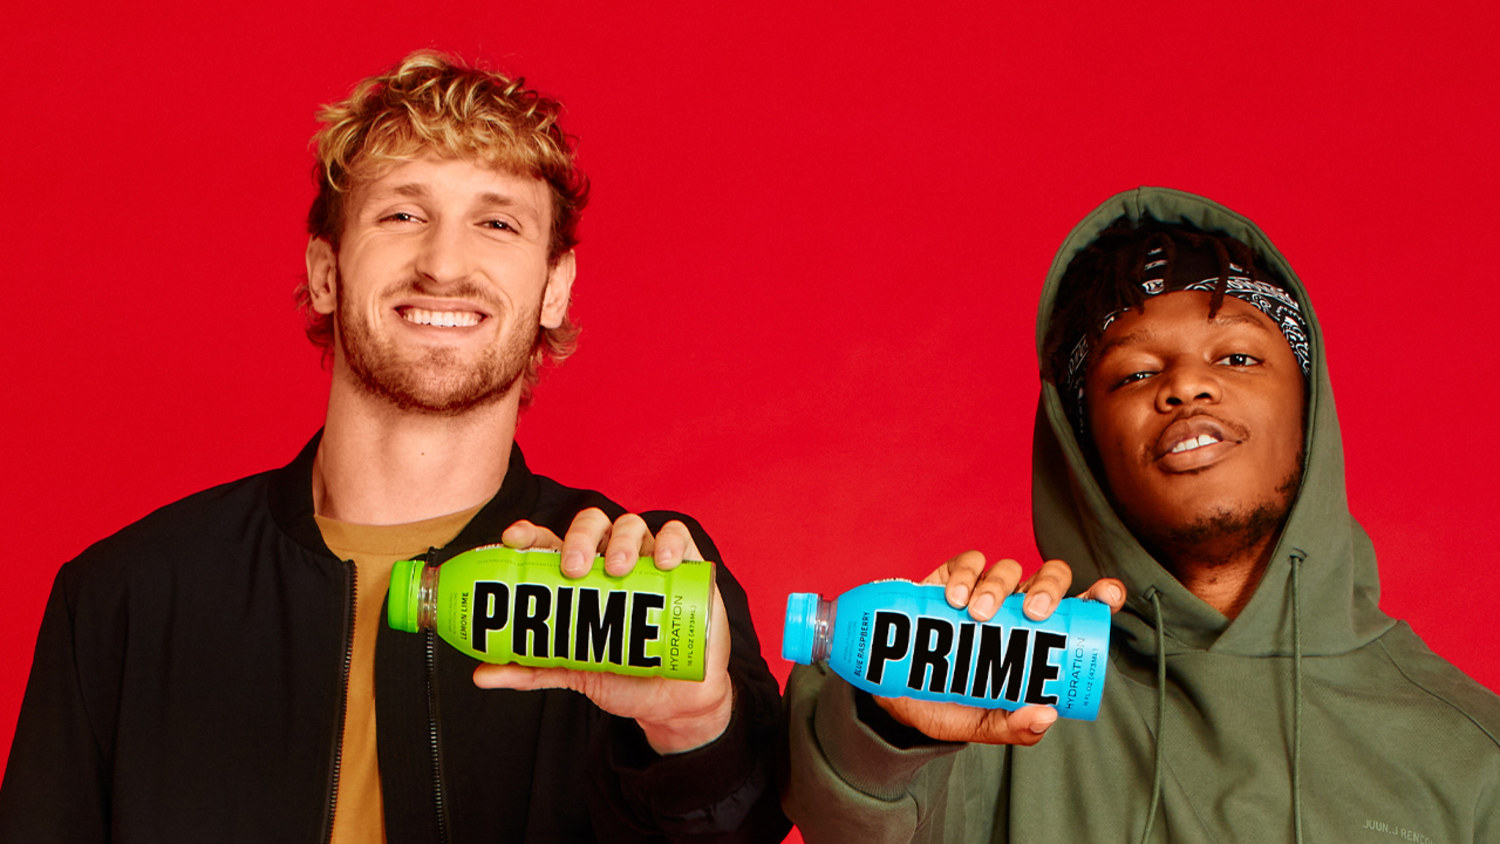 FDA asked to investigate Logan Paul's energy drink, PRIME, which has the  caffeine of 6 Coke cans